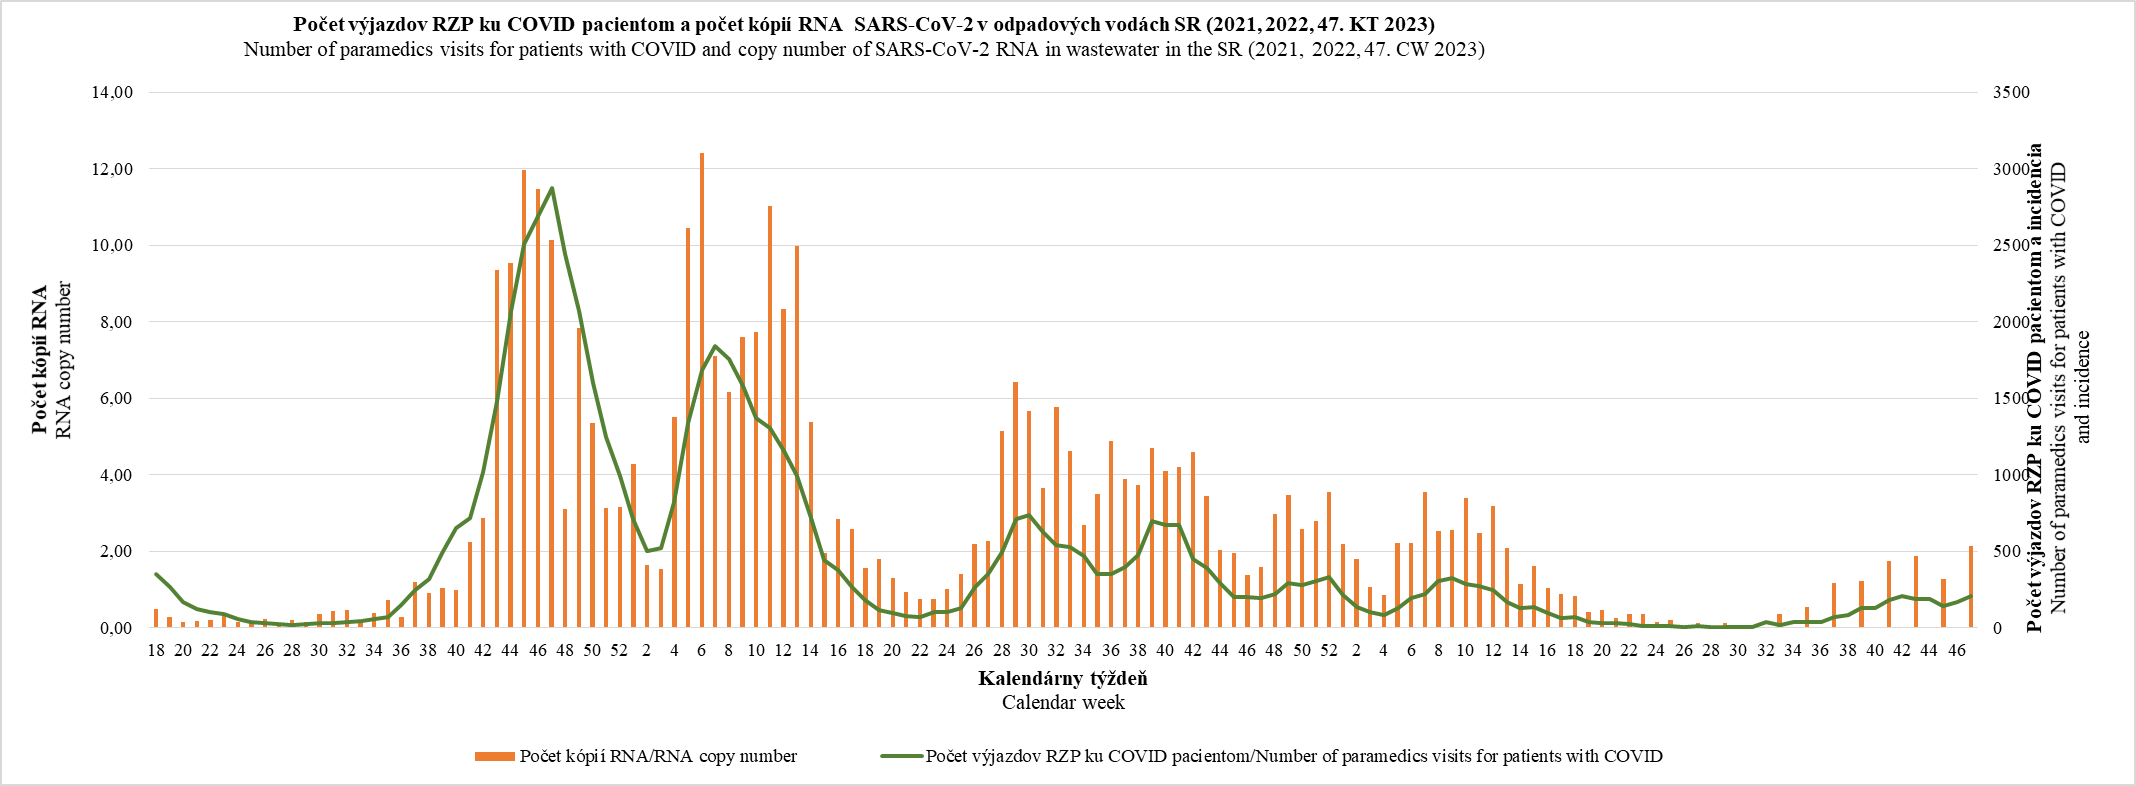 Number of pamedics visits for patients with COVID and number of SARS-CoV-2 RNA